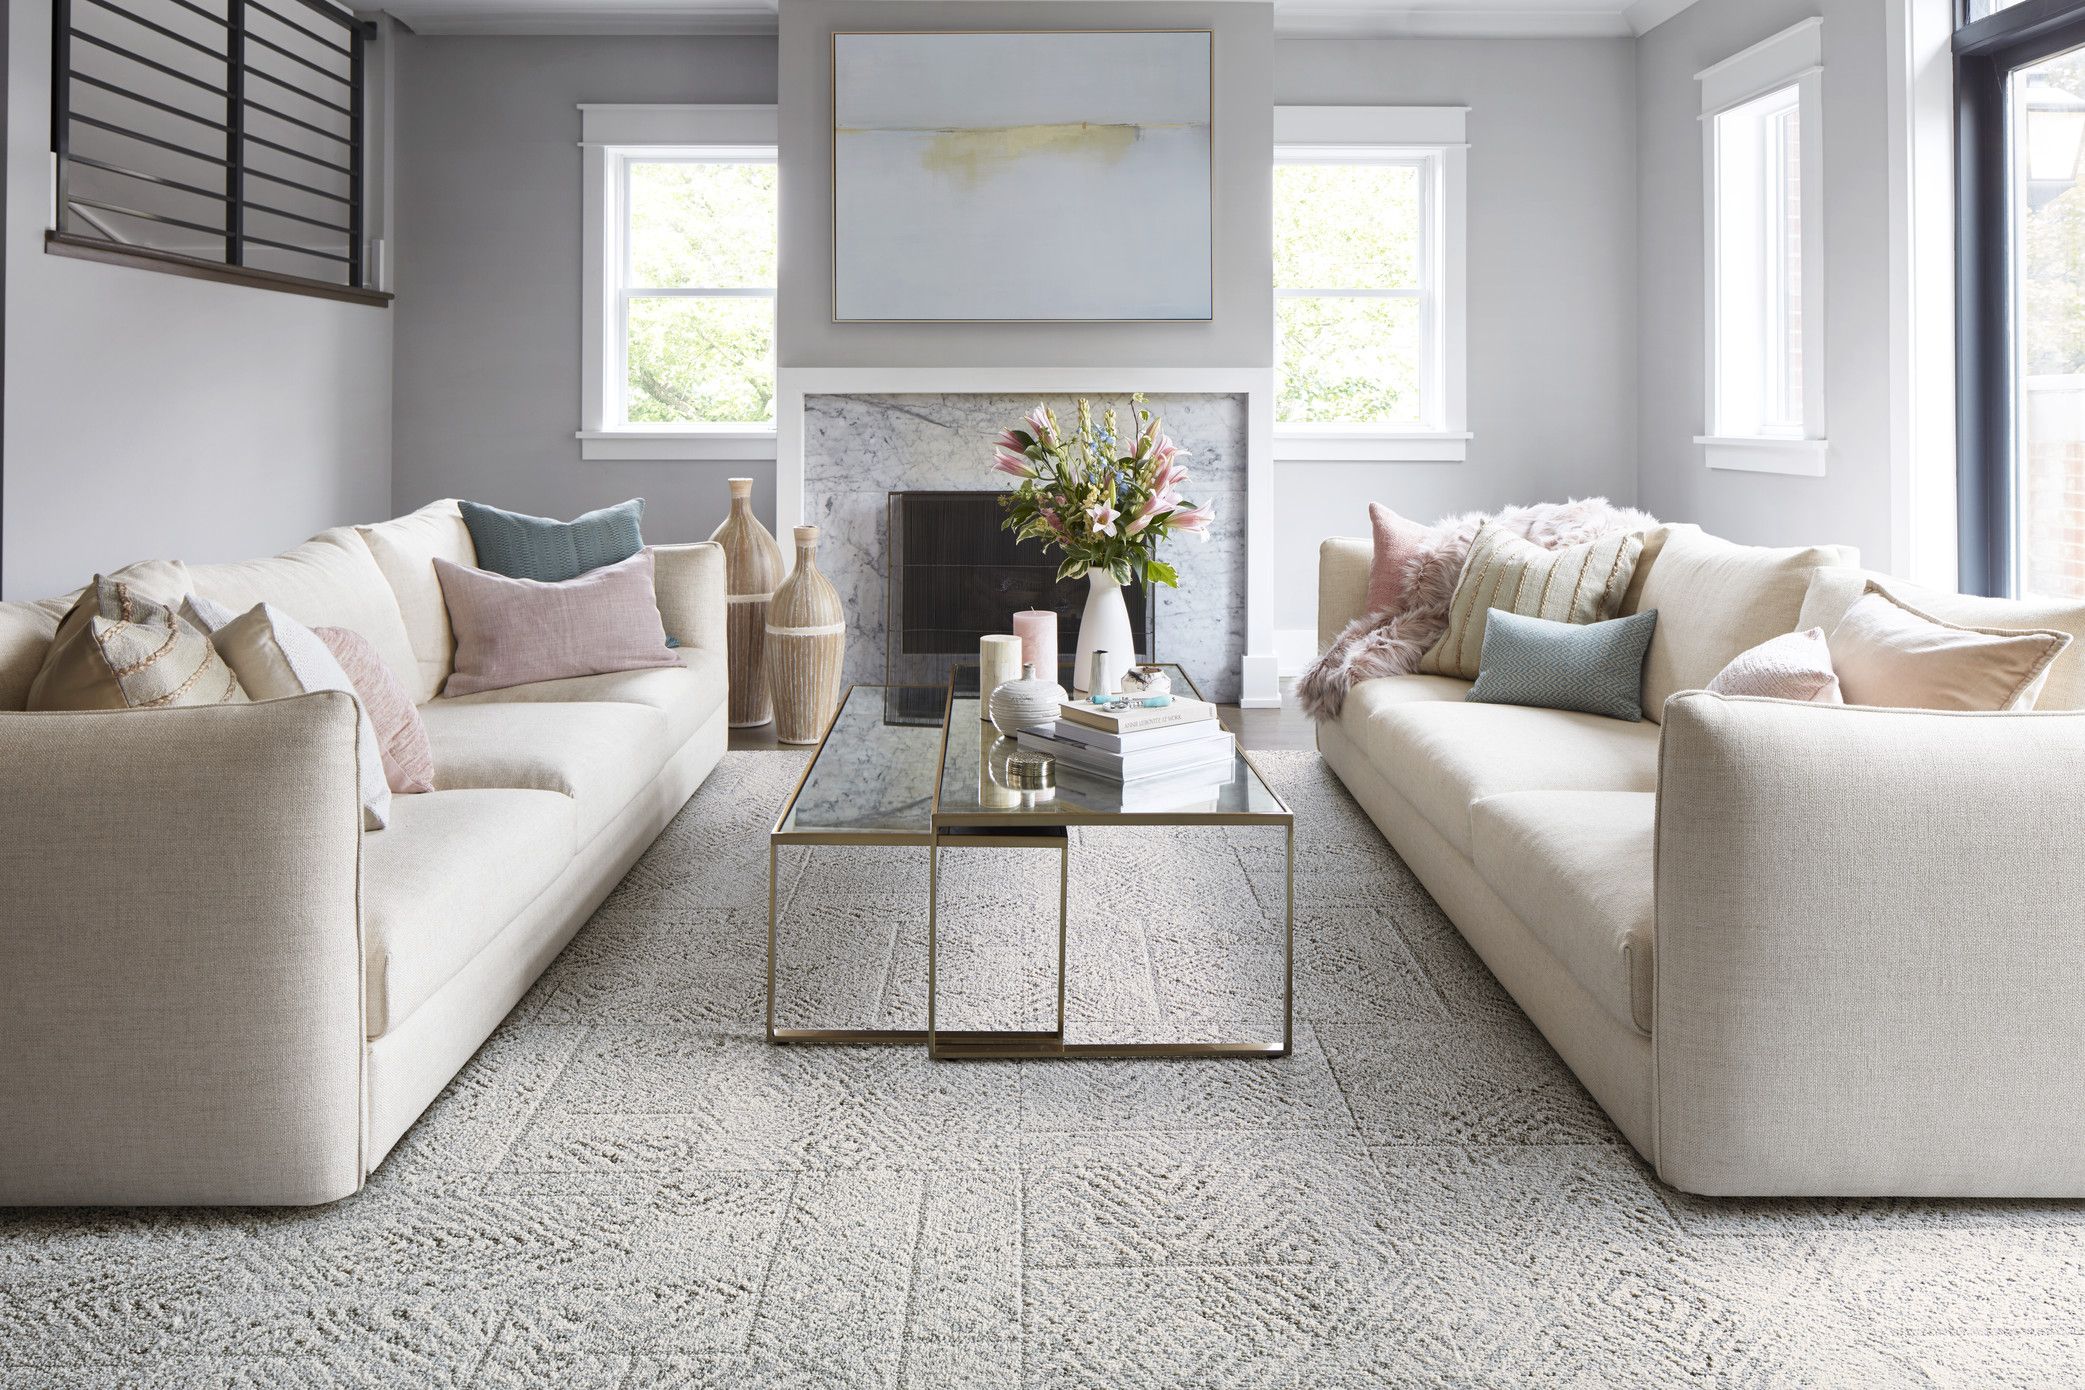 Living room rugs guide to choosing a luxury rug for living rooms